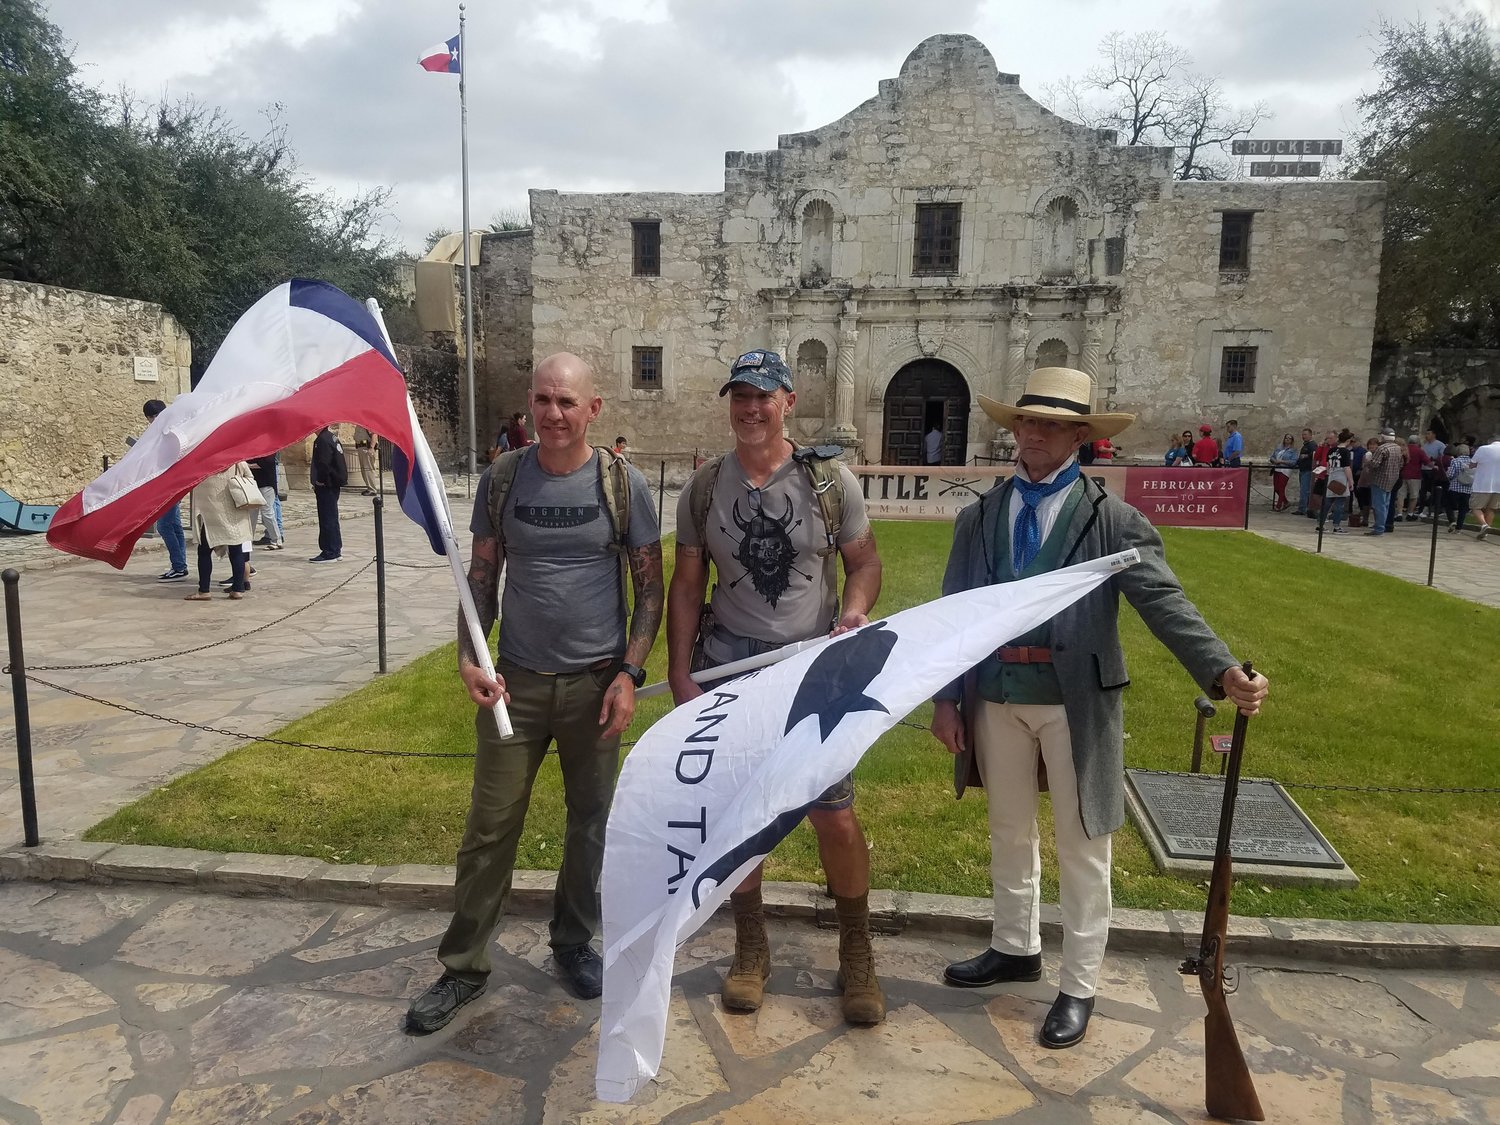 Terrence Ogden and Keith Busby of Wimberley, Texas walked 75 miles from Gonzales to the Alamo over the weekend to honor and commemorate the arrival of the Immortal 32. Terrence and Keith are seen holding the Come and Take It and Texas state flags.